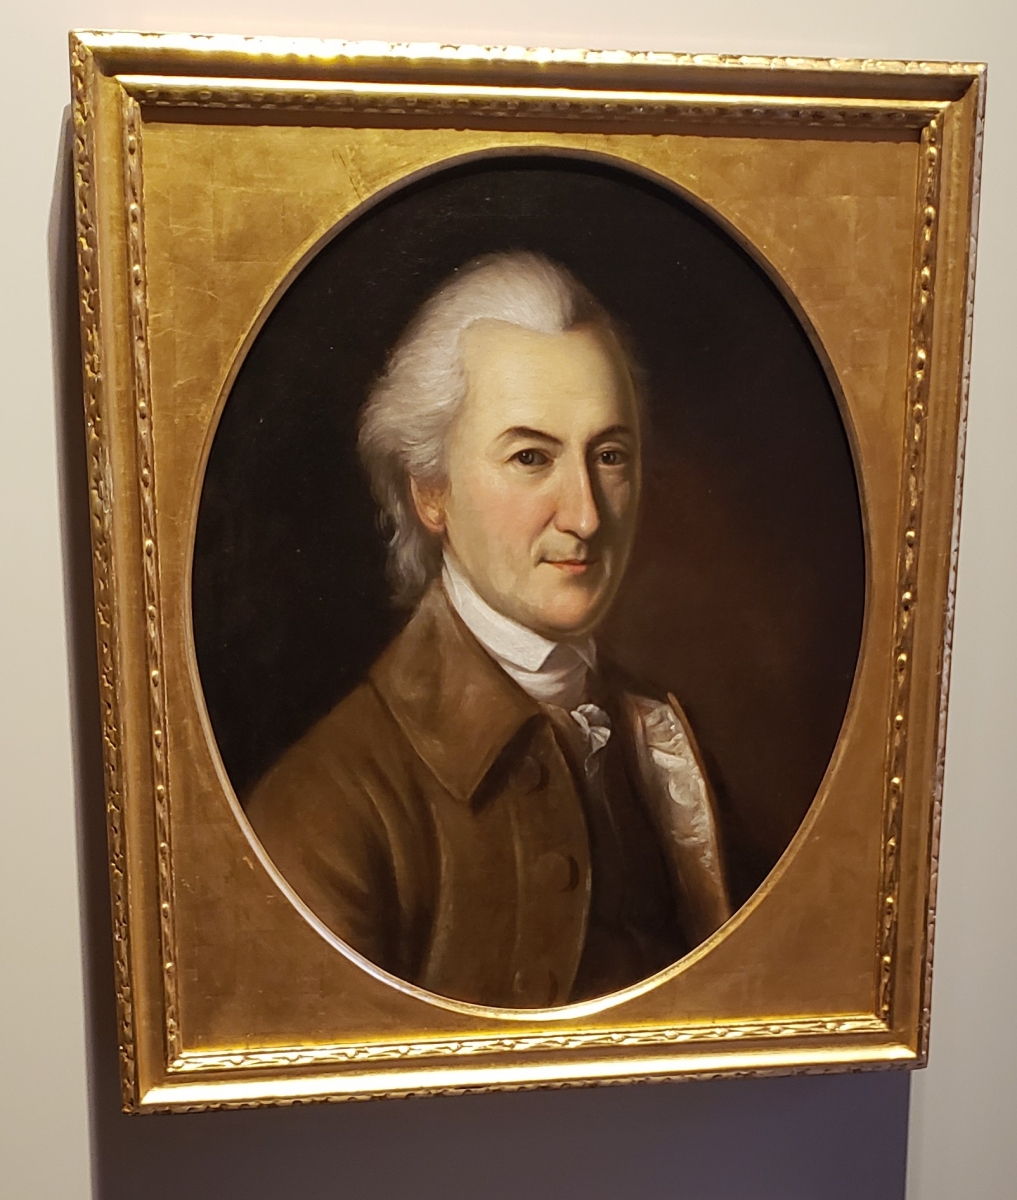 John Dickinson Portrait in Second Bank of the United States Gallery